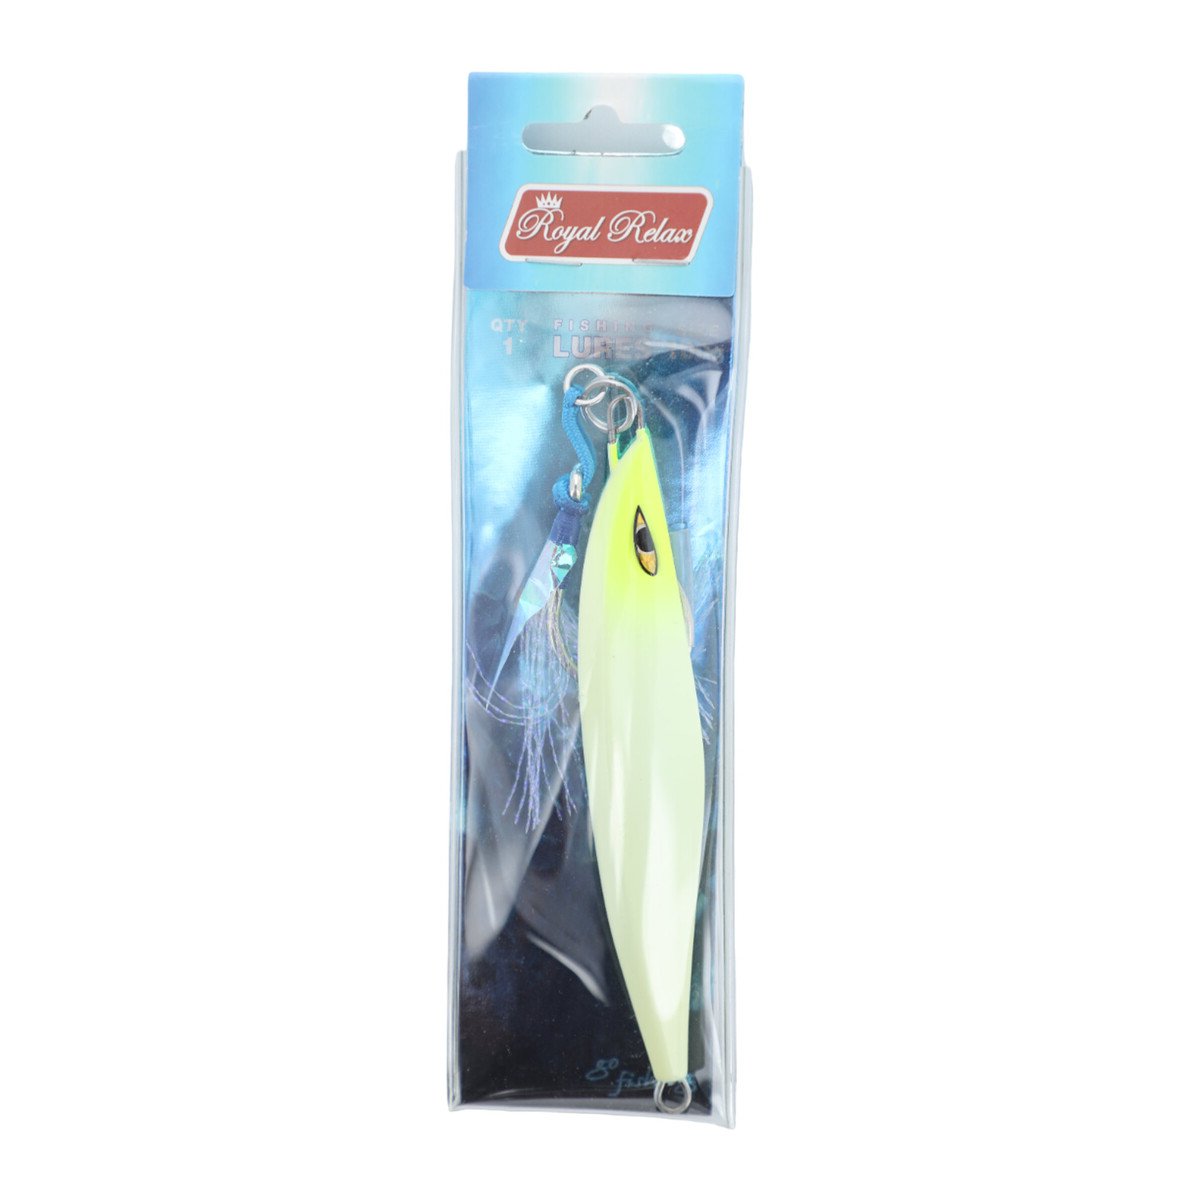 Royal Relax Fishing Lure 141A 100g 1pc Online at Best Price